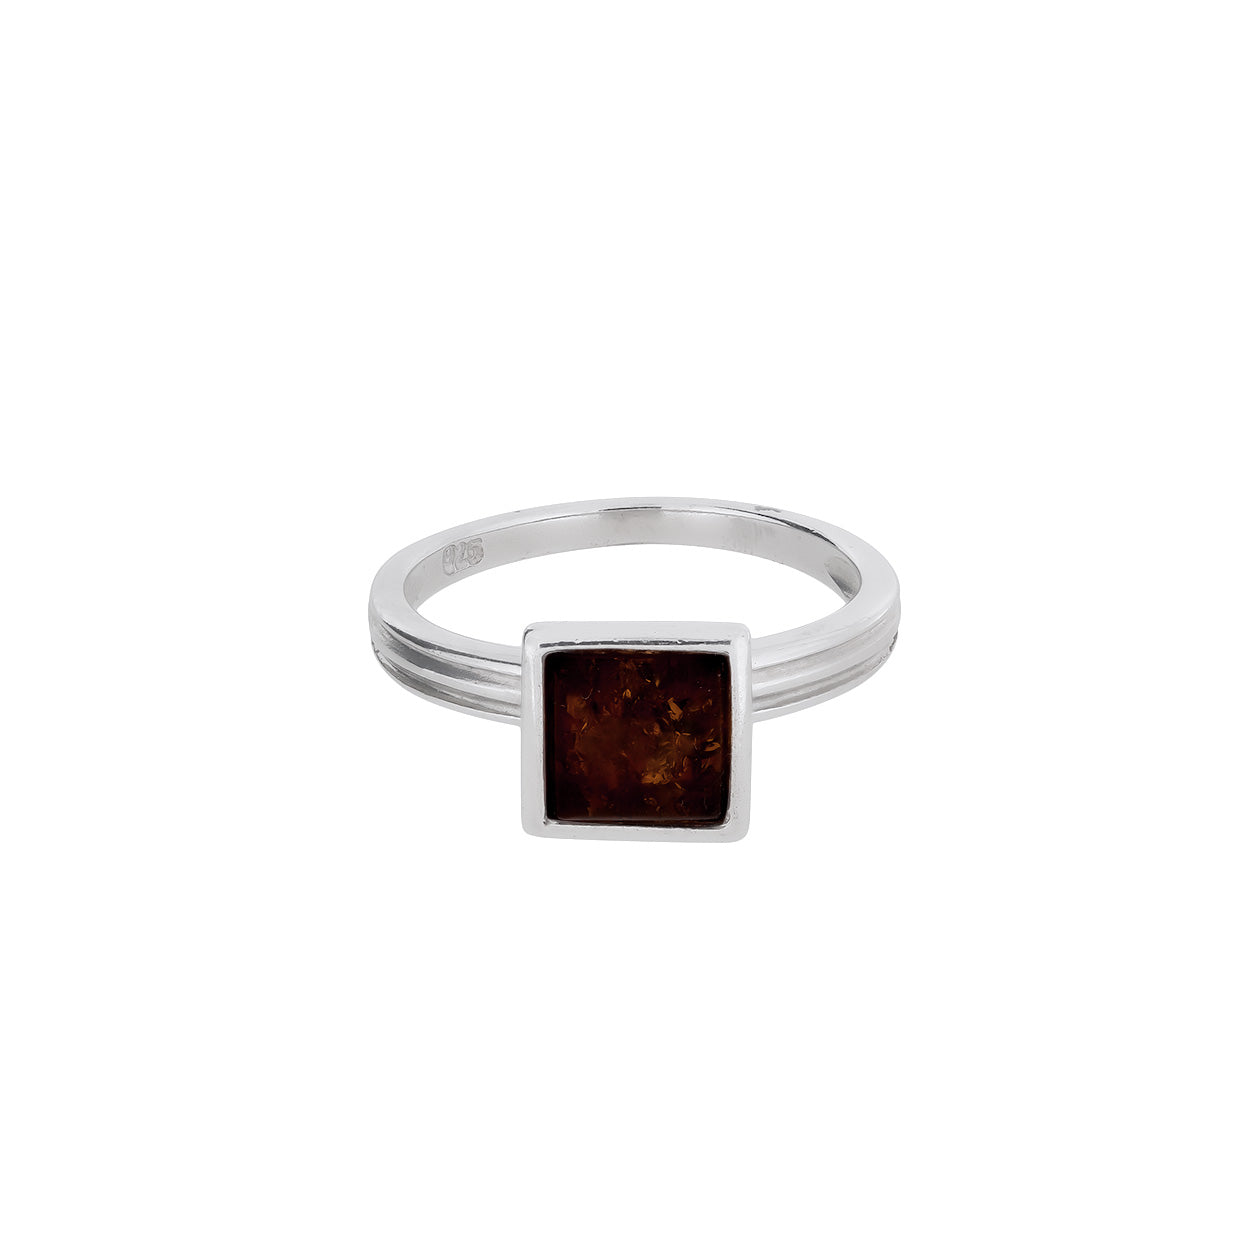 Silver Square Amber Ring